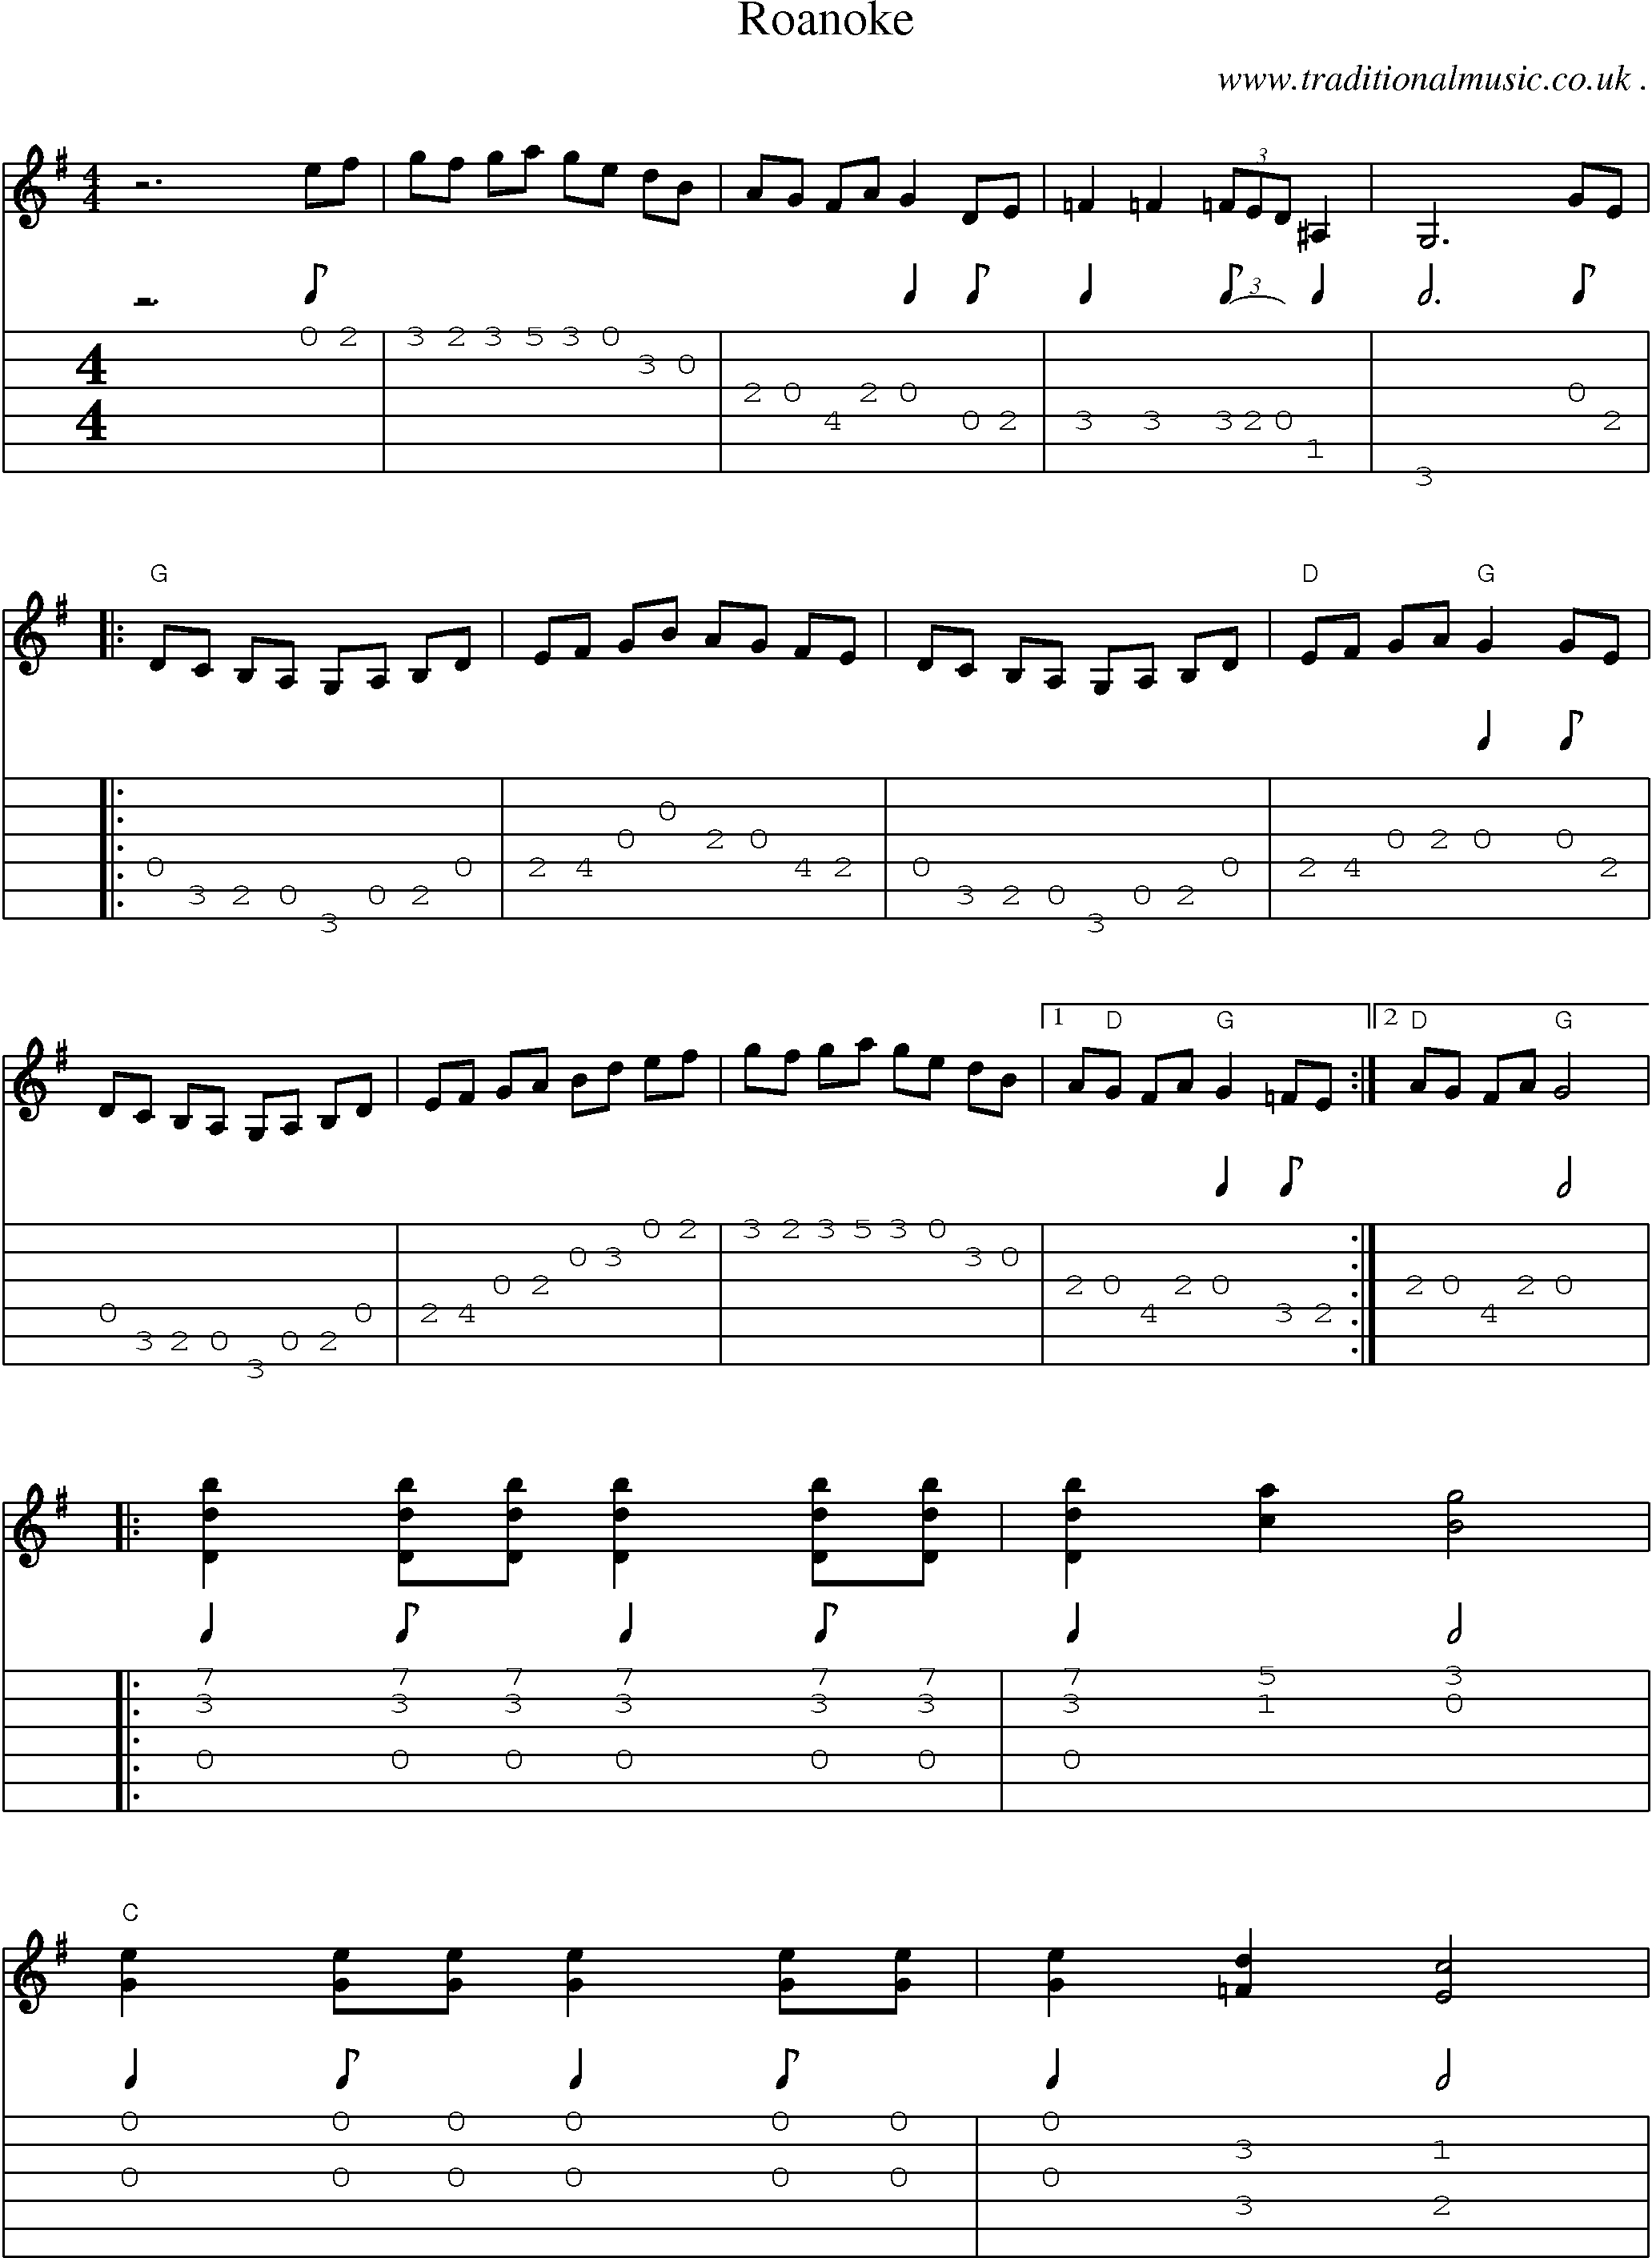 Music Score and Guitar Tabs for Roanoke